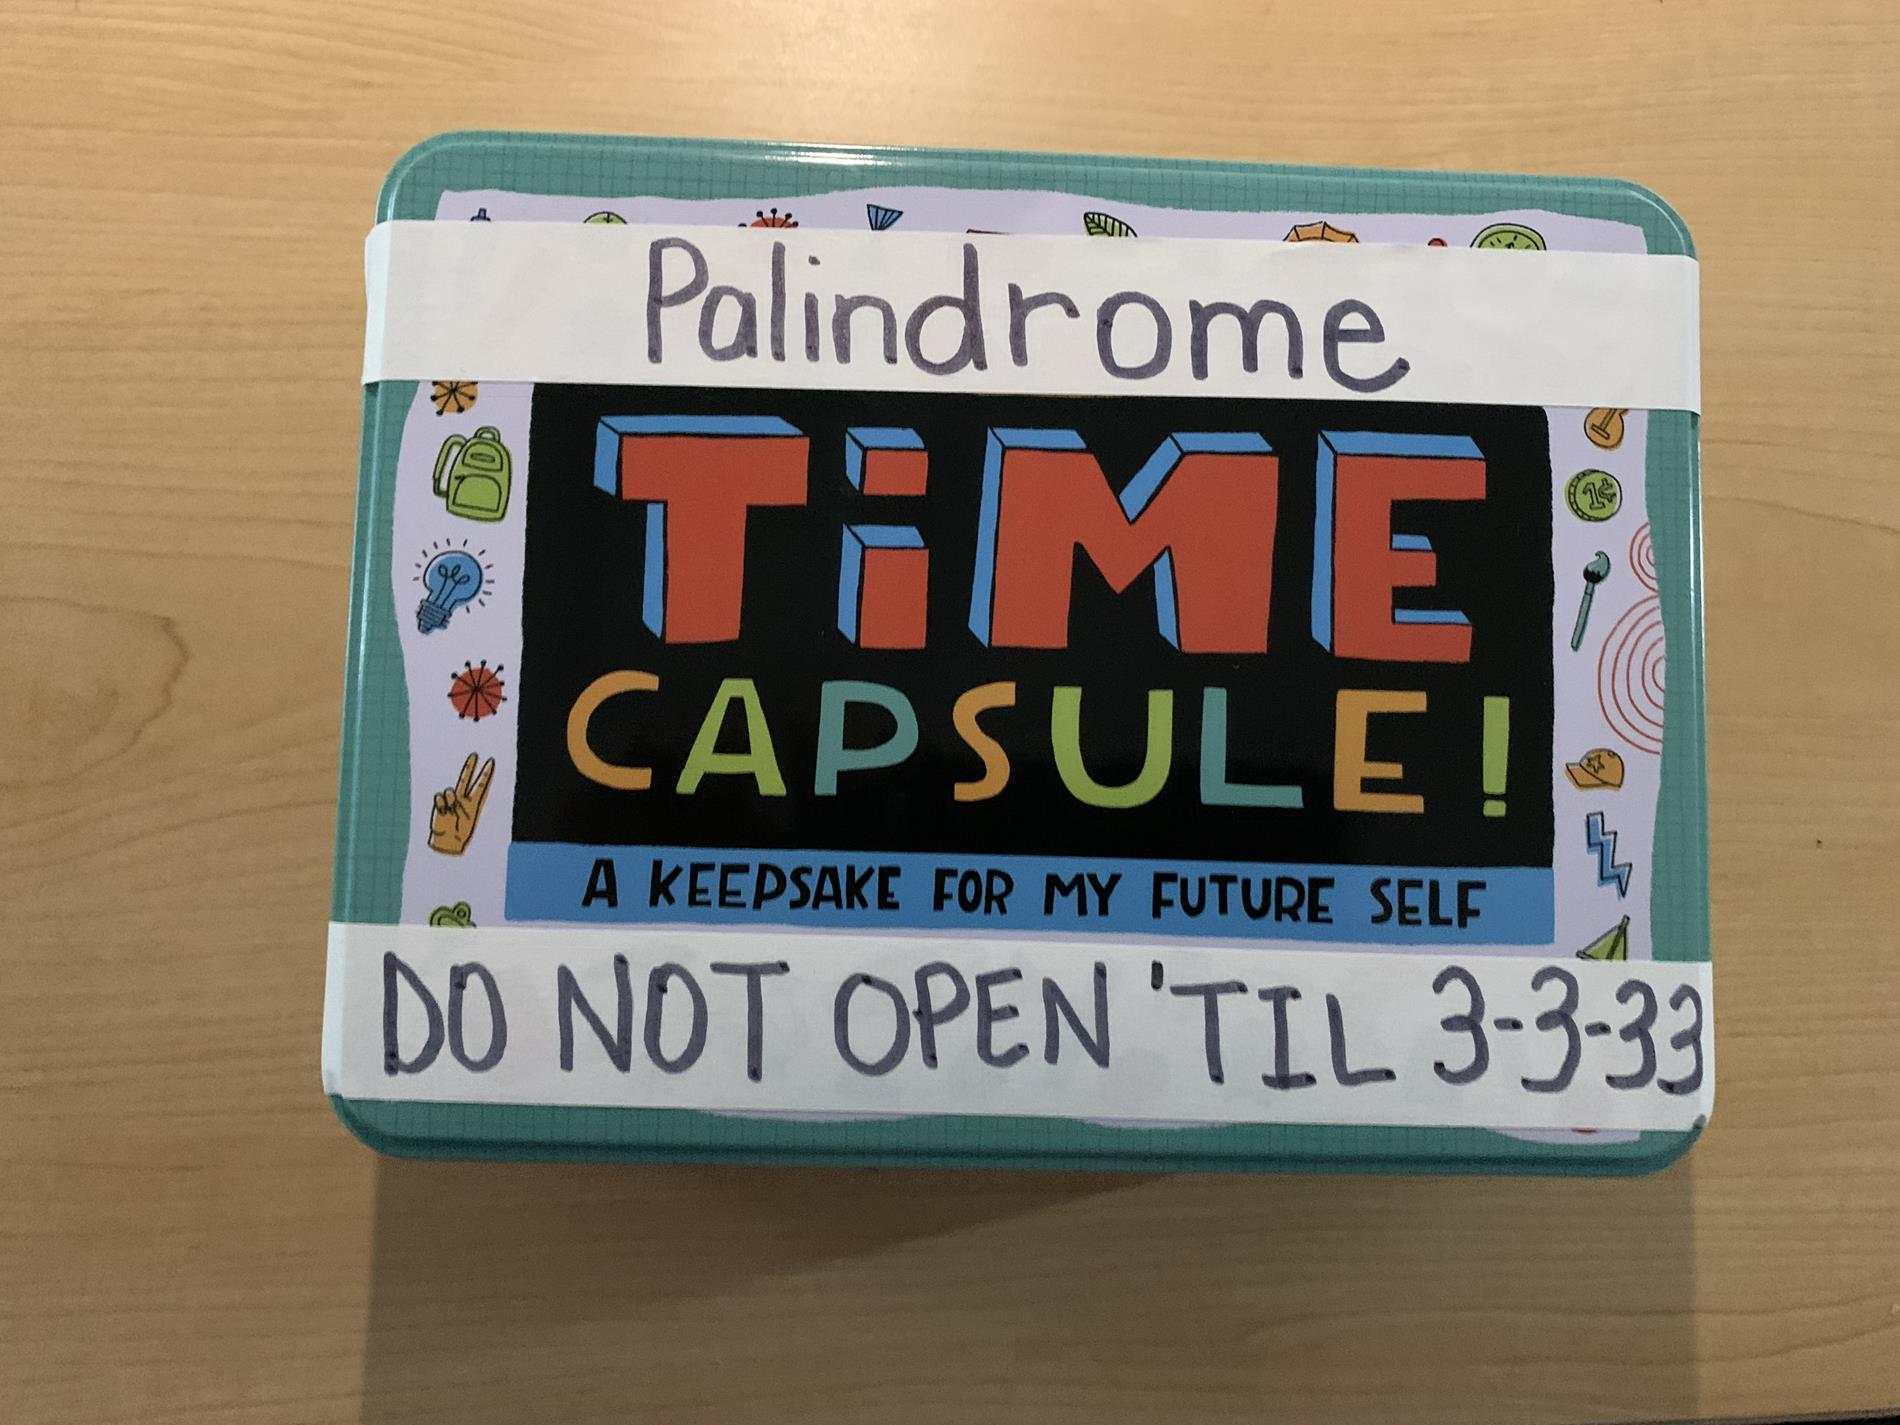 Palindrome Time Capsule